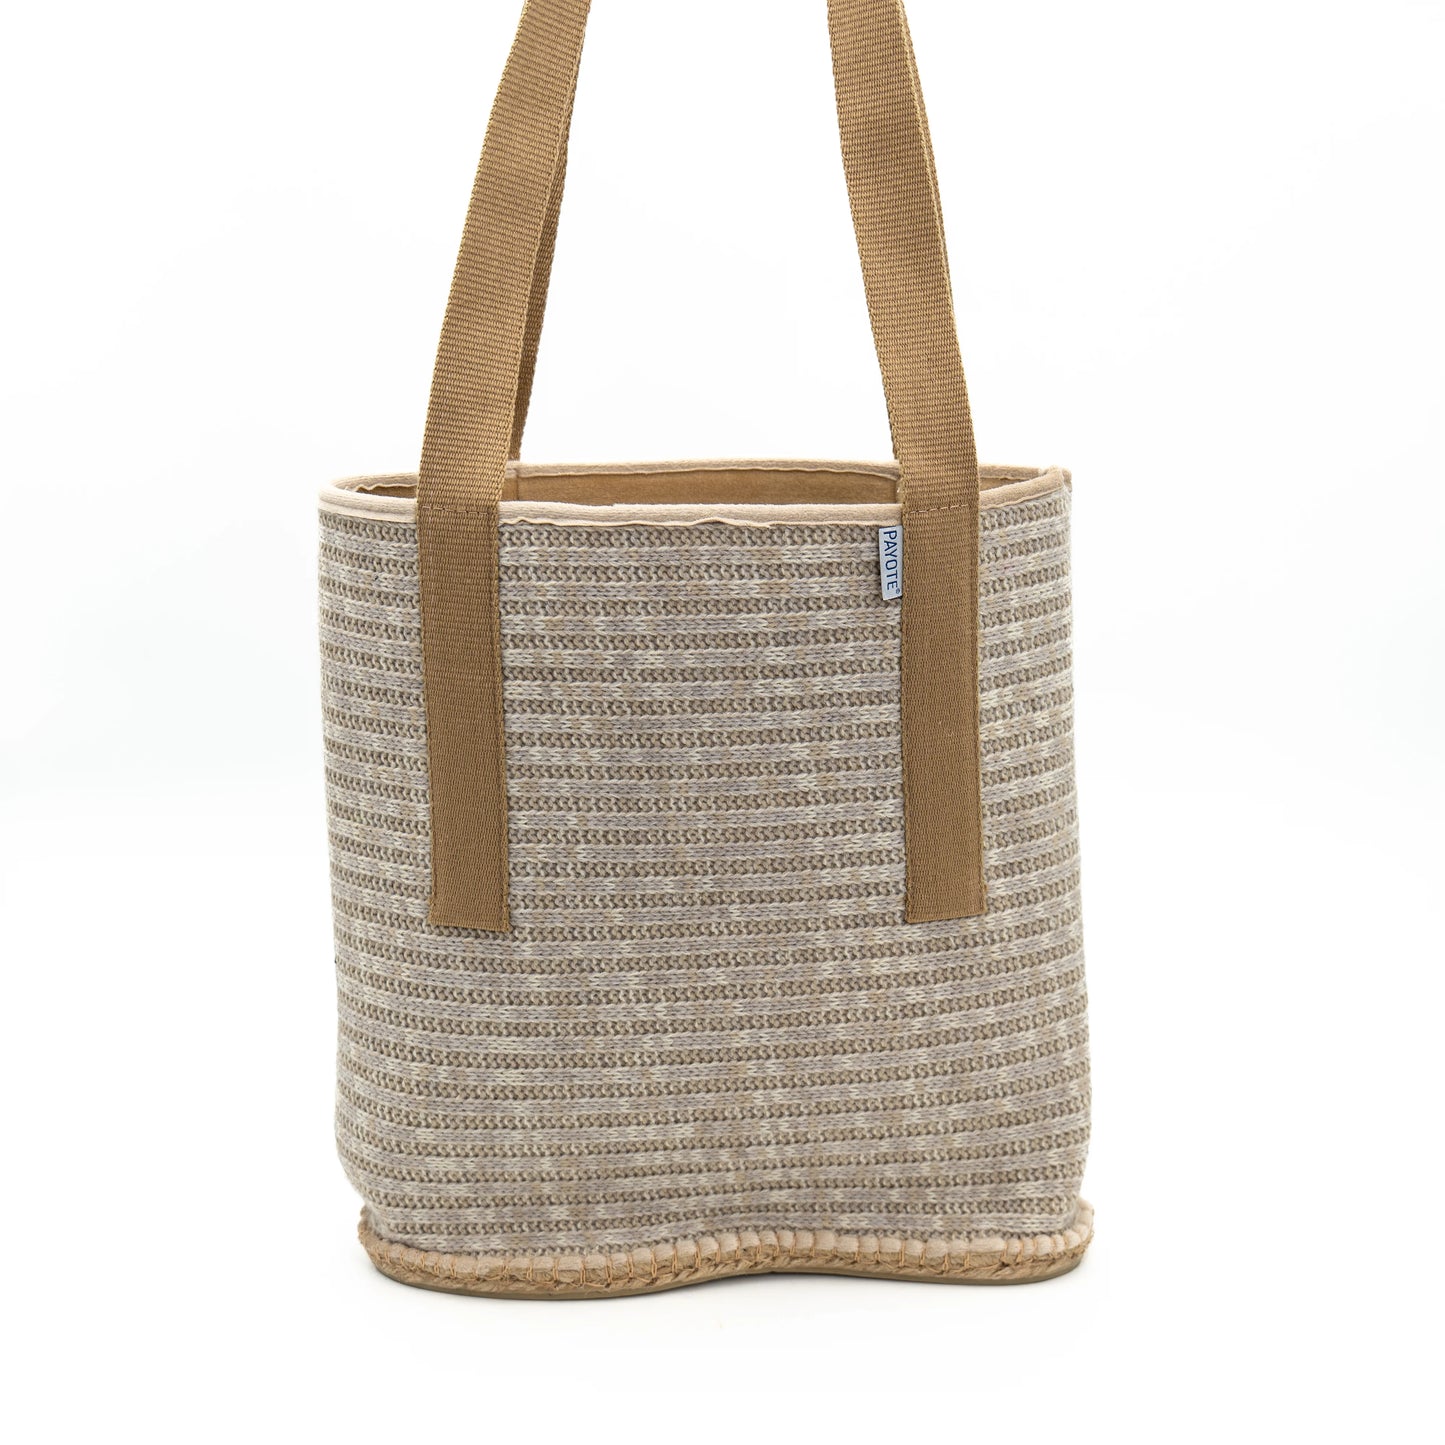 Sac espadrille fourré gris made in France